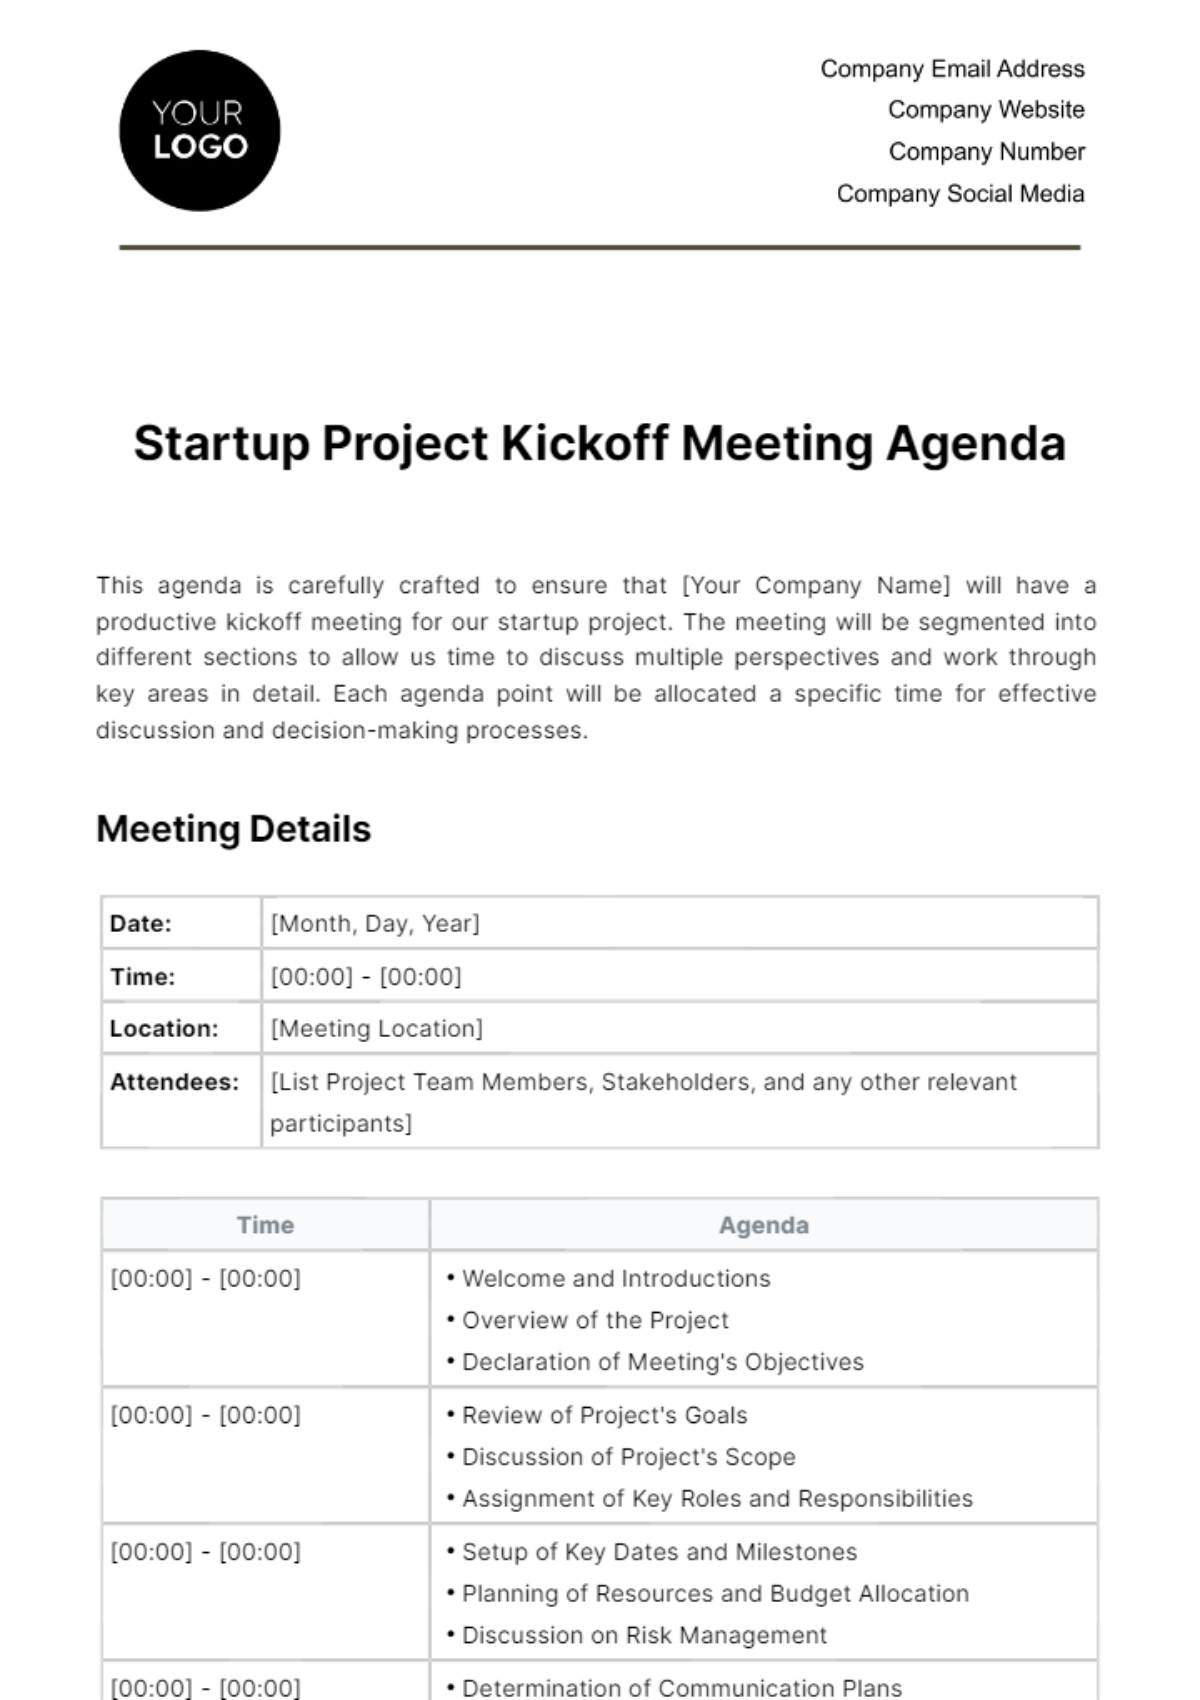 Startup Project Kickoff Meeting Agenda Template